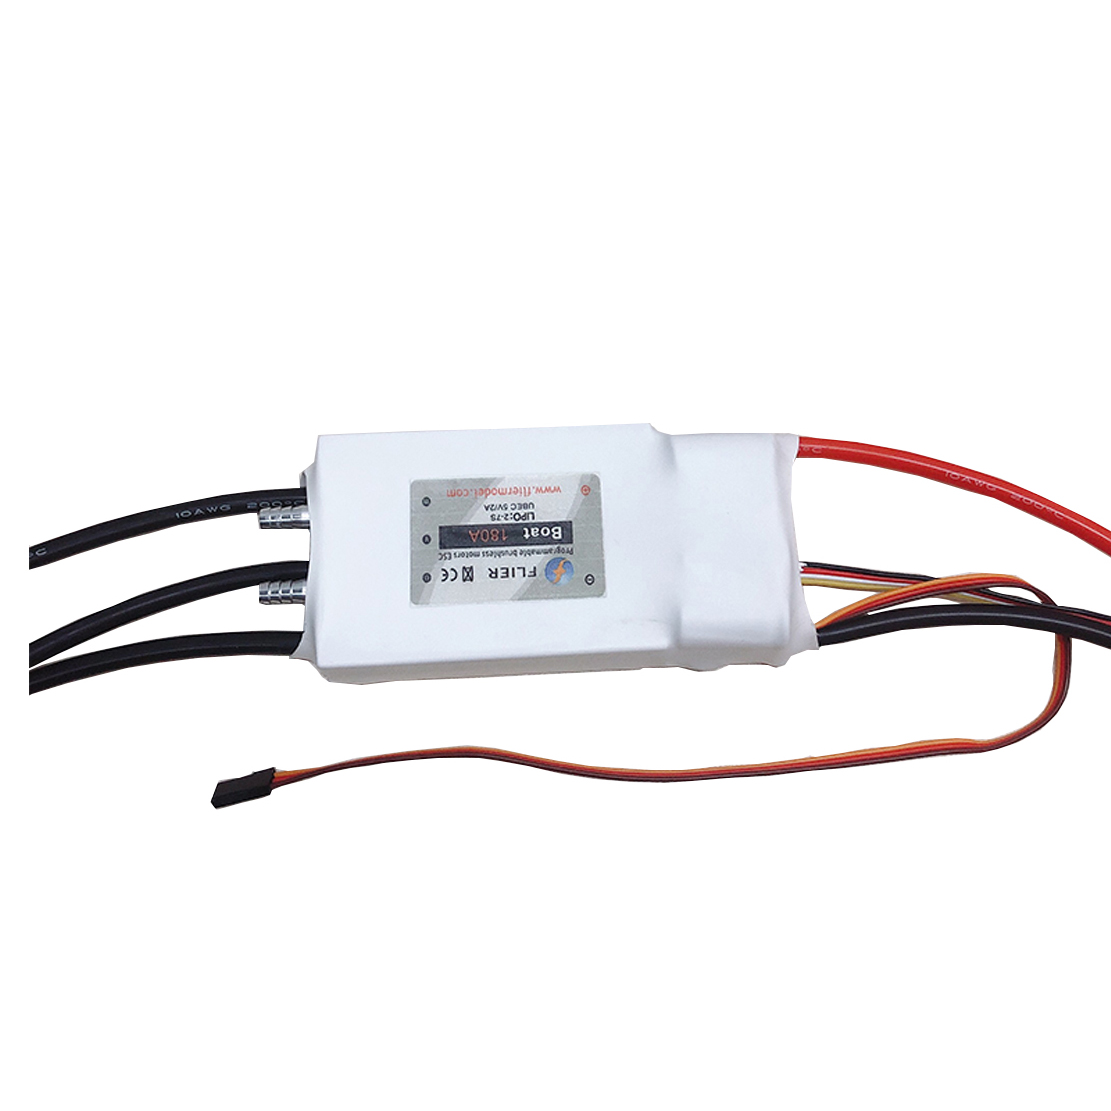 Water-cooled brushless controller ESC 7S 180A for Boat